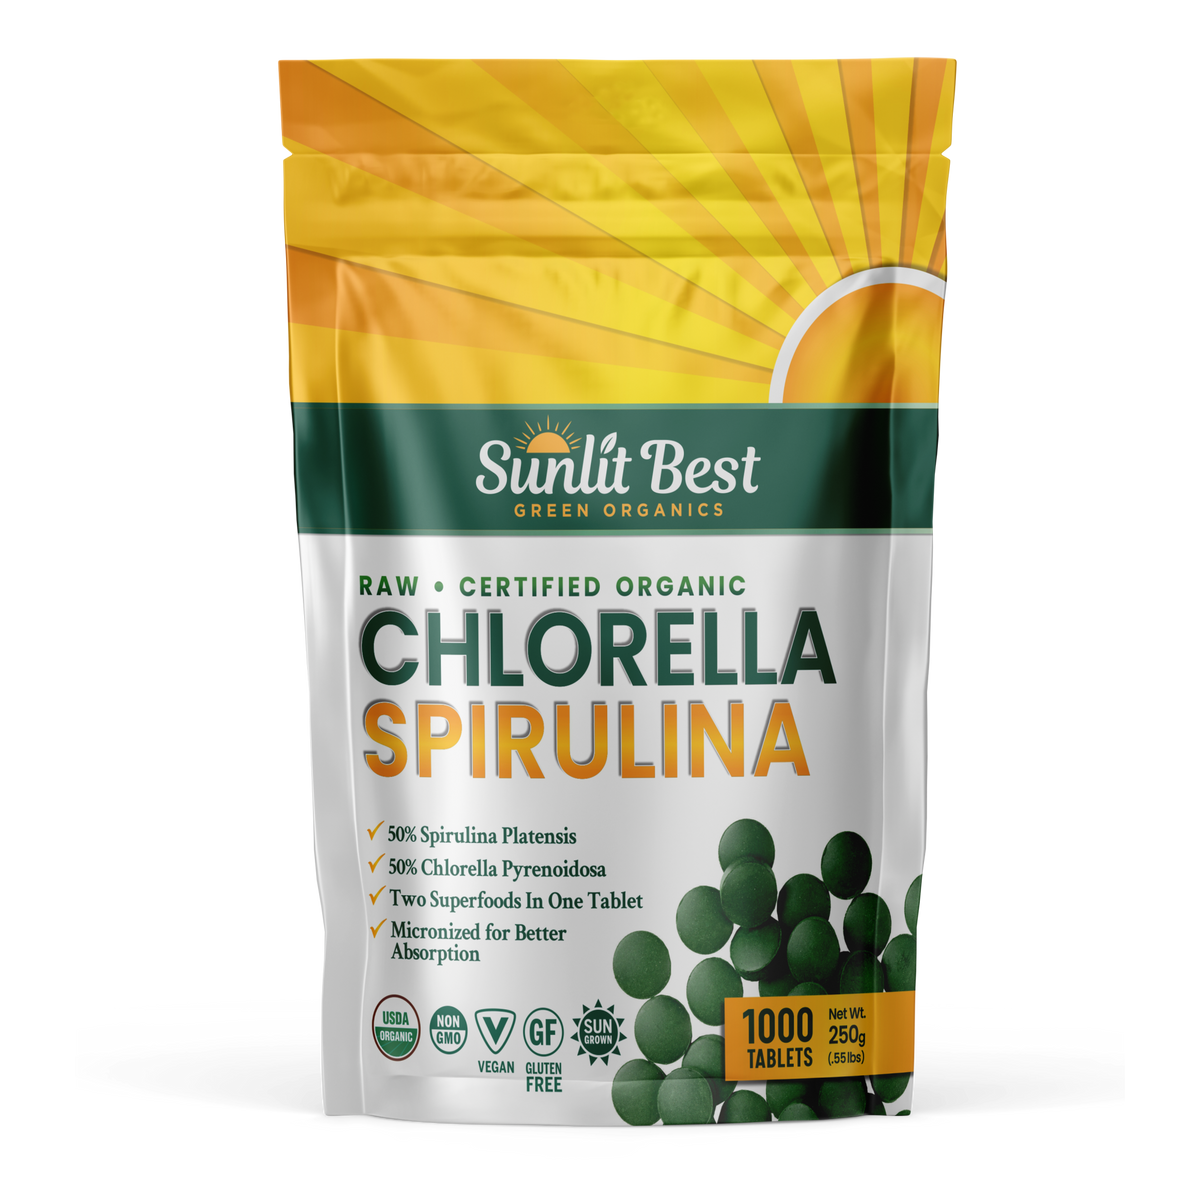 Chlorella Spirulina 50/50 (Mega-Pack 1000) Cracked Cell Wall, 100% Pure &amp; Clean, Organic Raw Non-GMO Green Superfood, Protein Packed, by Sunlit, Best Green Organics